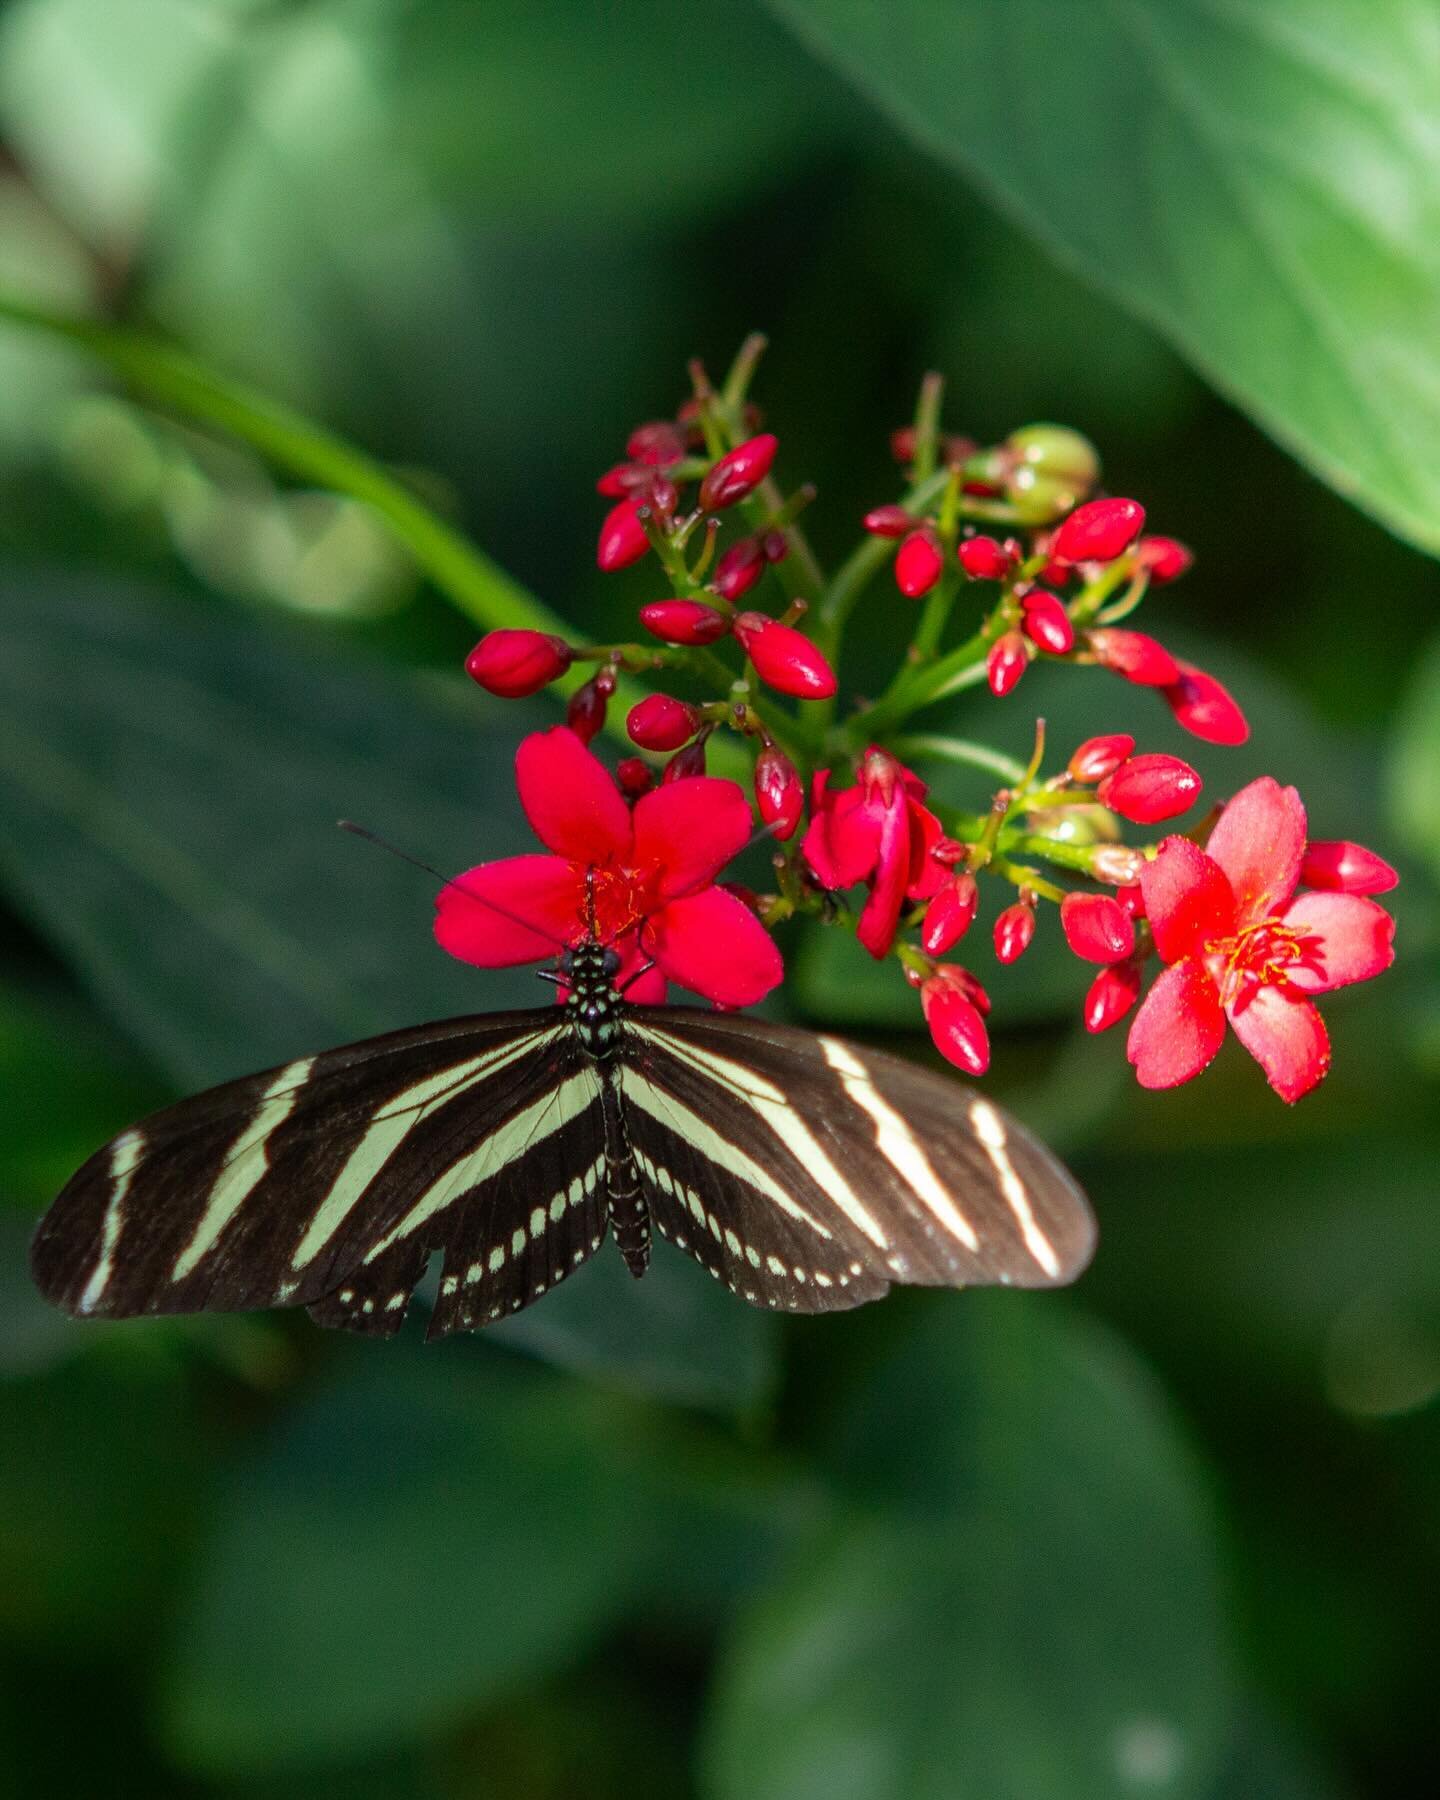 The &ldquo;Butterfly House,&rdquo; located at Spring Creek Gardens in Fort Collins is a USDA facility that houses 22 species of North American butterflies. Visitors pay a small fee to enter the greenhouse and get close and personal with the butterfli